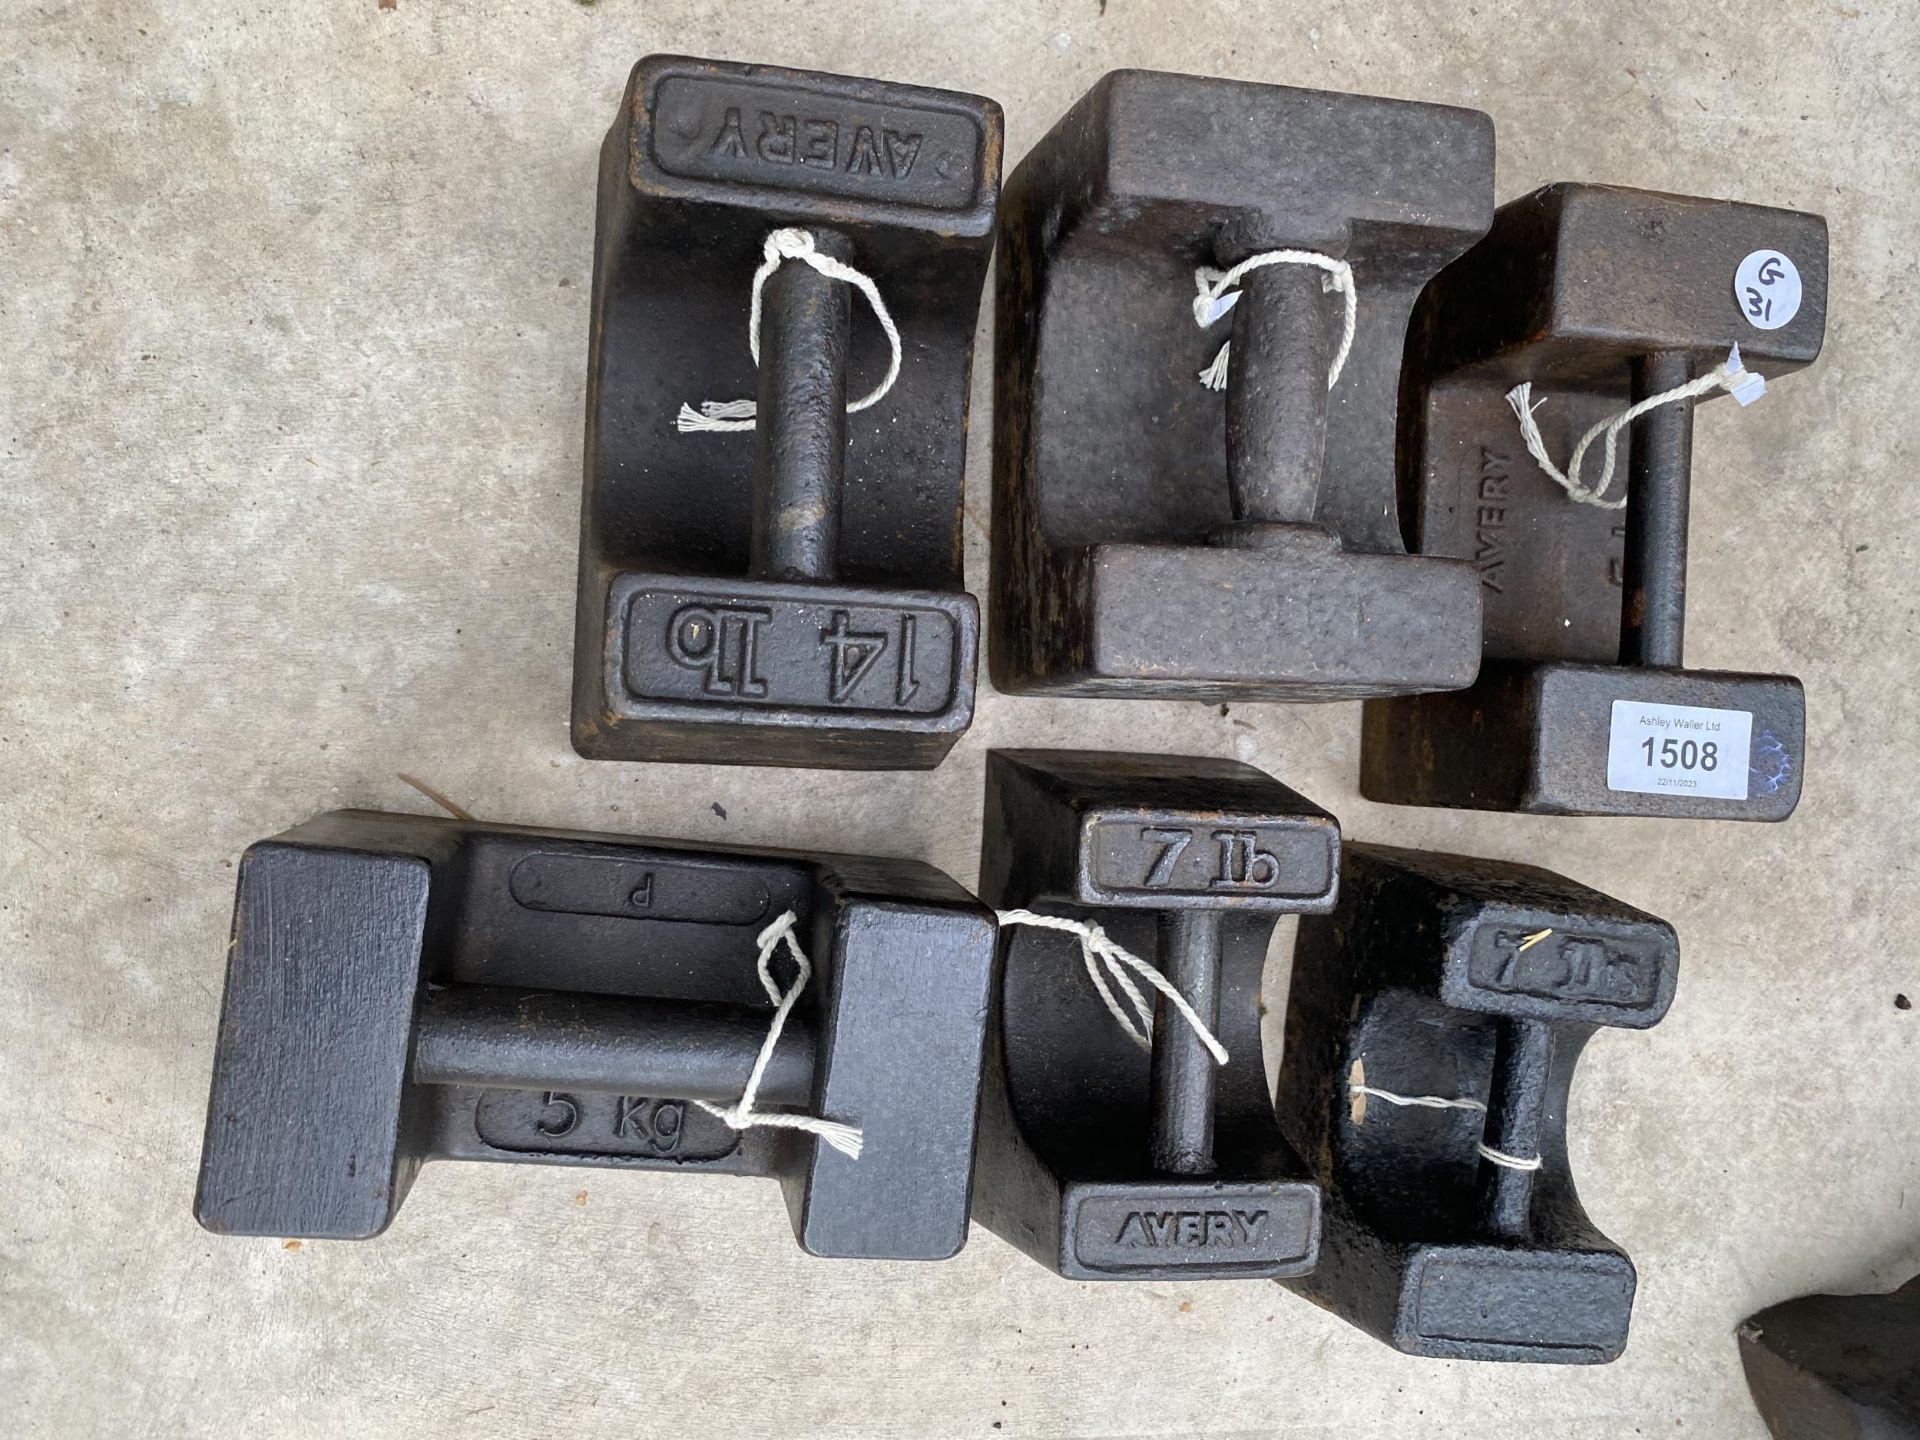 SIX ASSORTED CAST IRON WEIGHTS TO INCLUDE 14LB AND 7 LB - Image 2 of 2